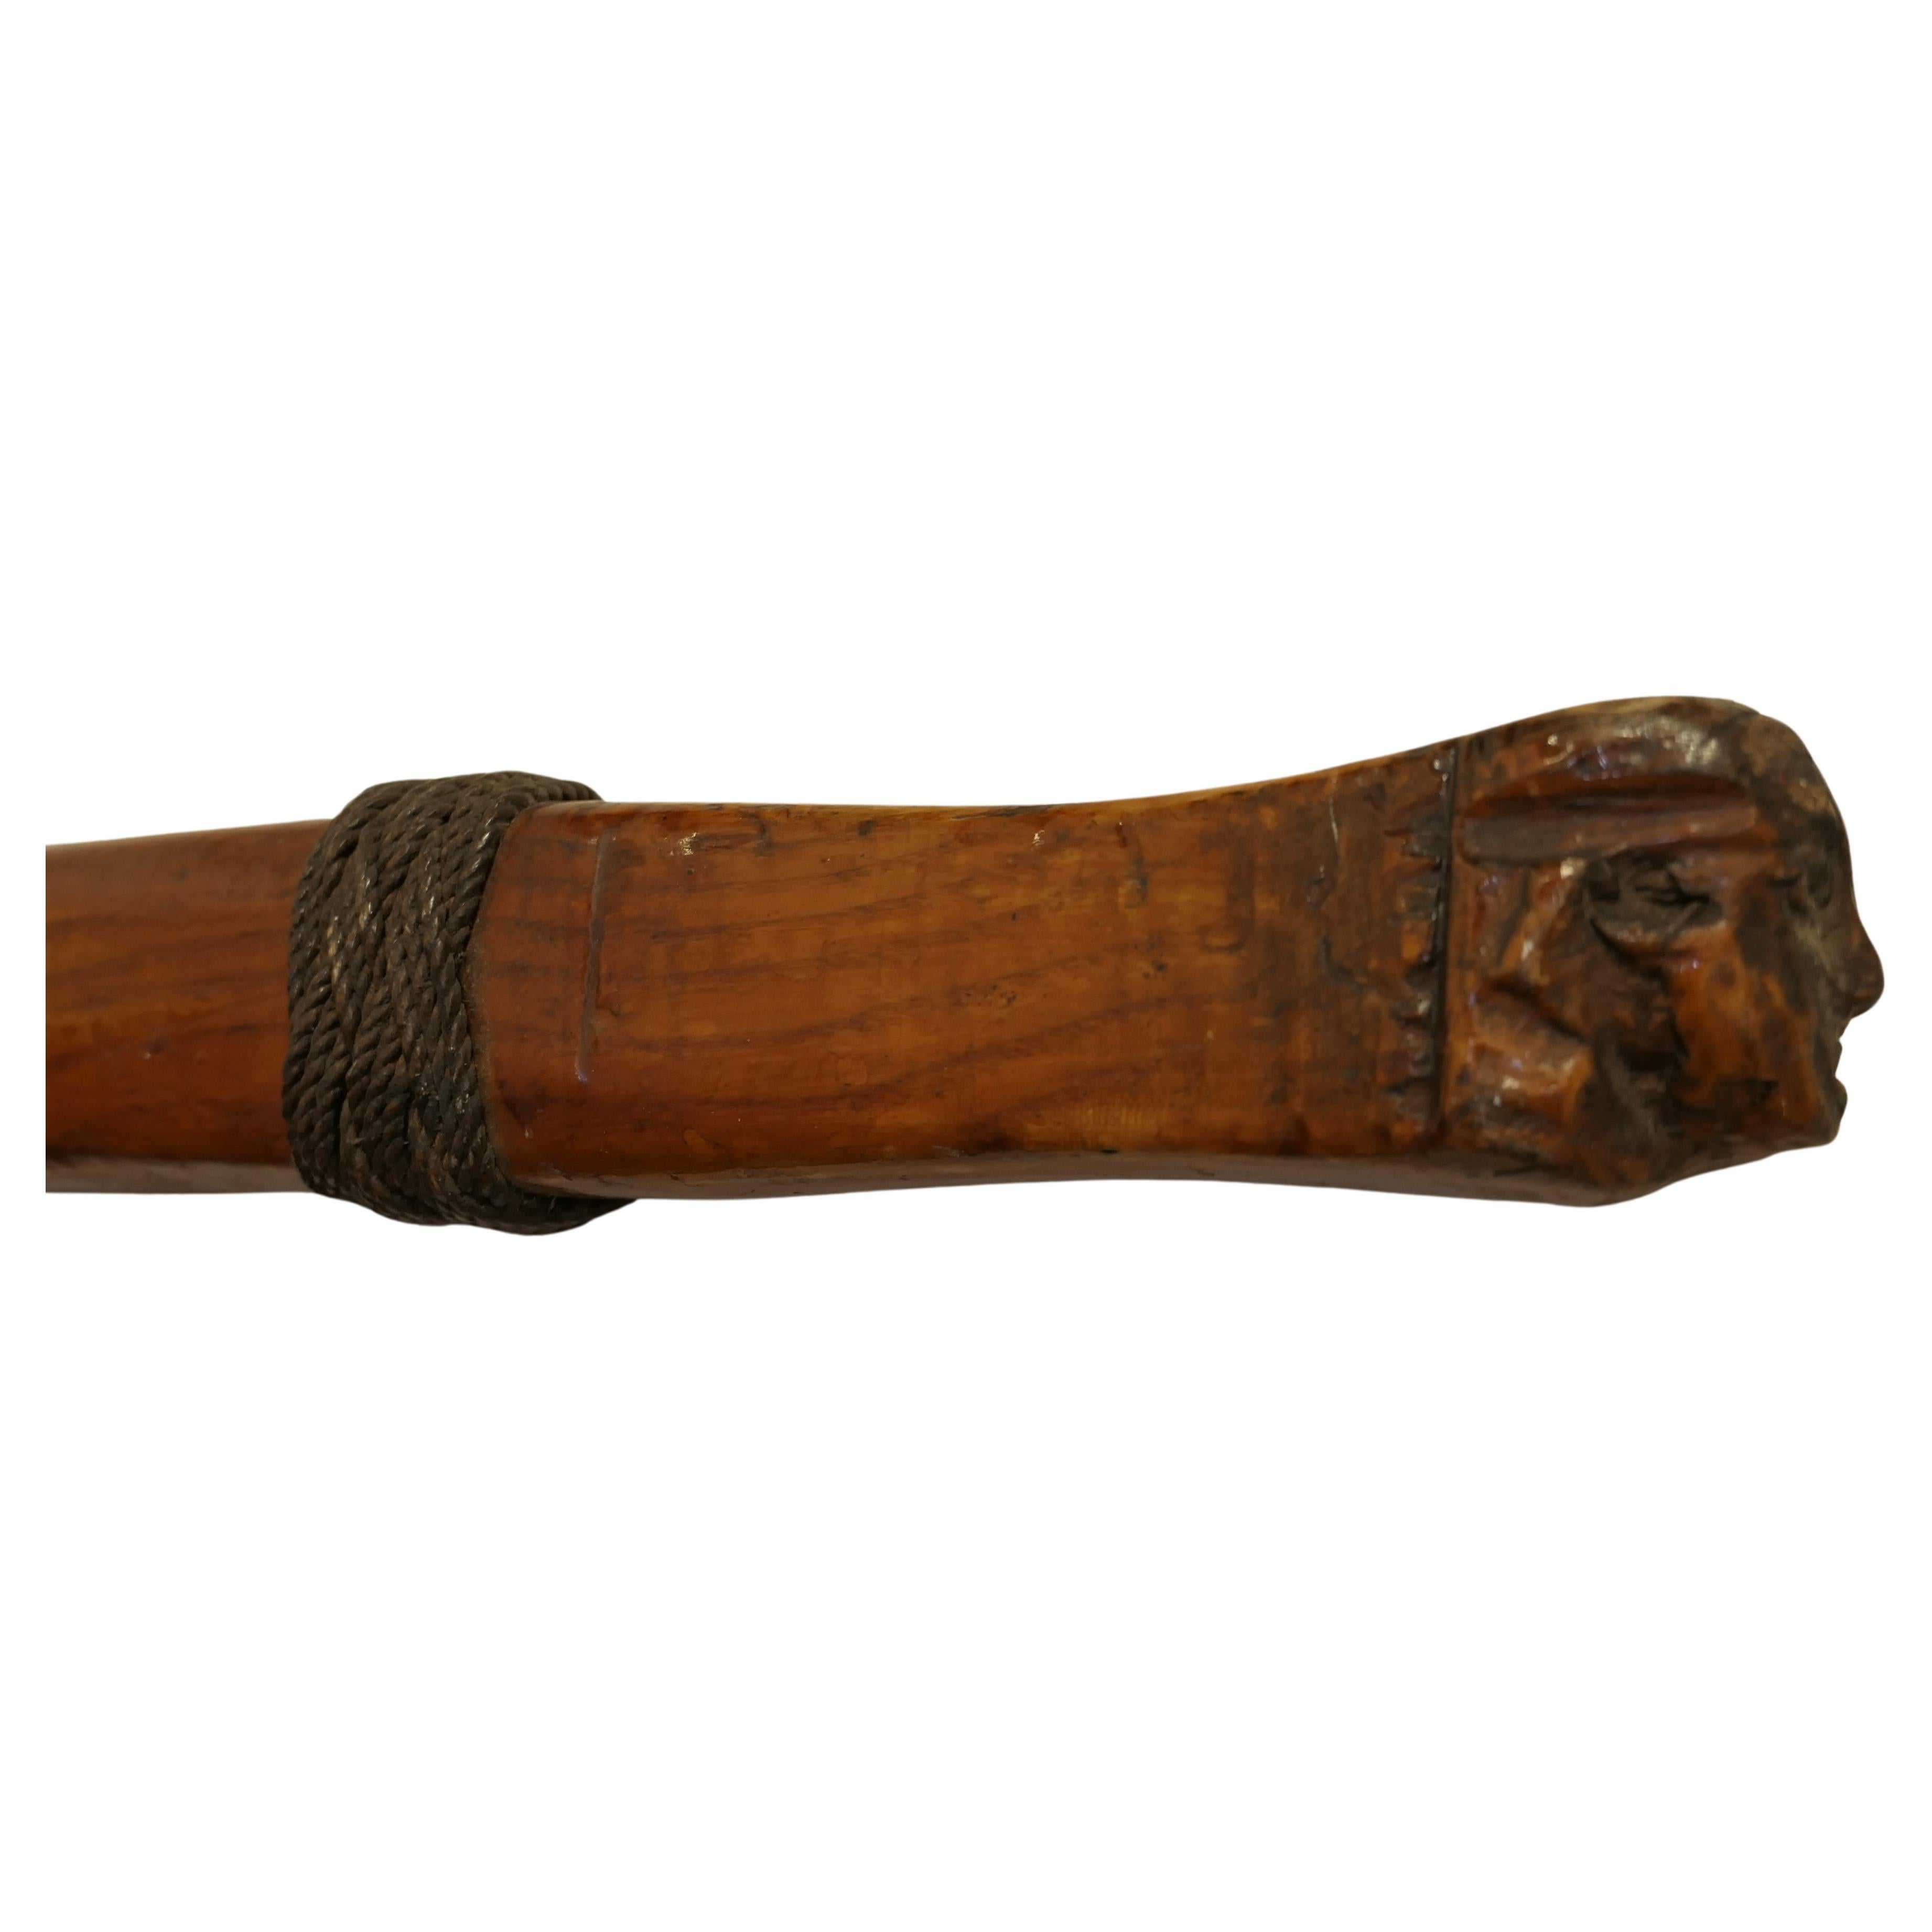 19th Century Yacht Rudder and Carved Tiller